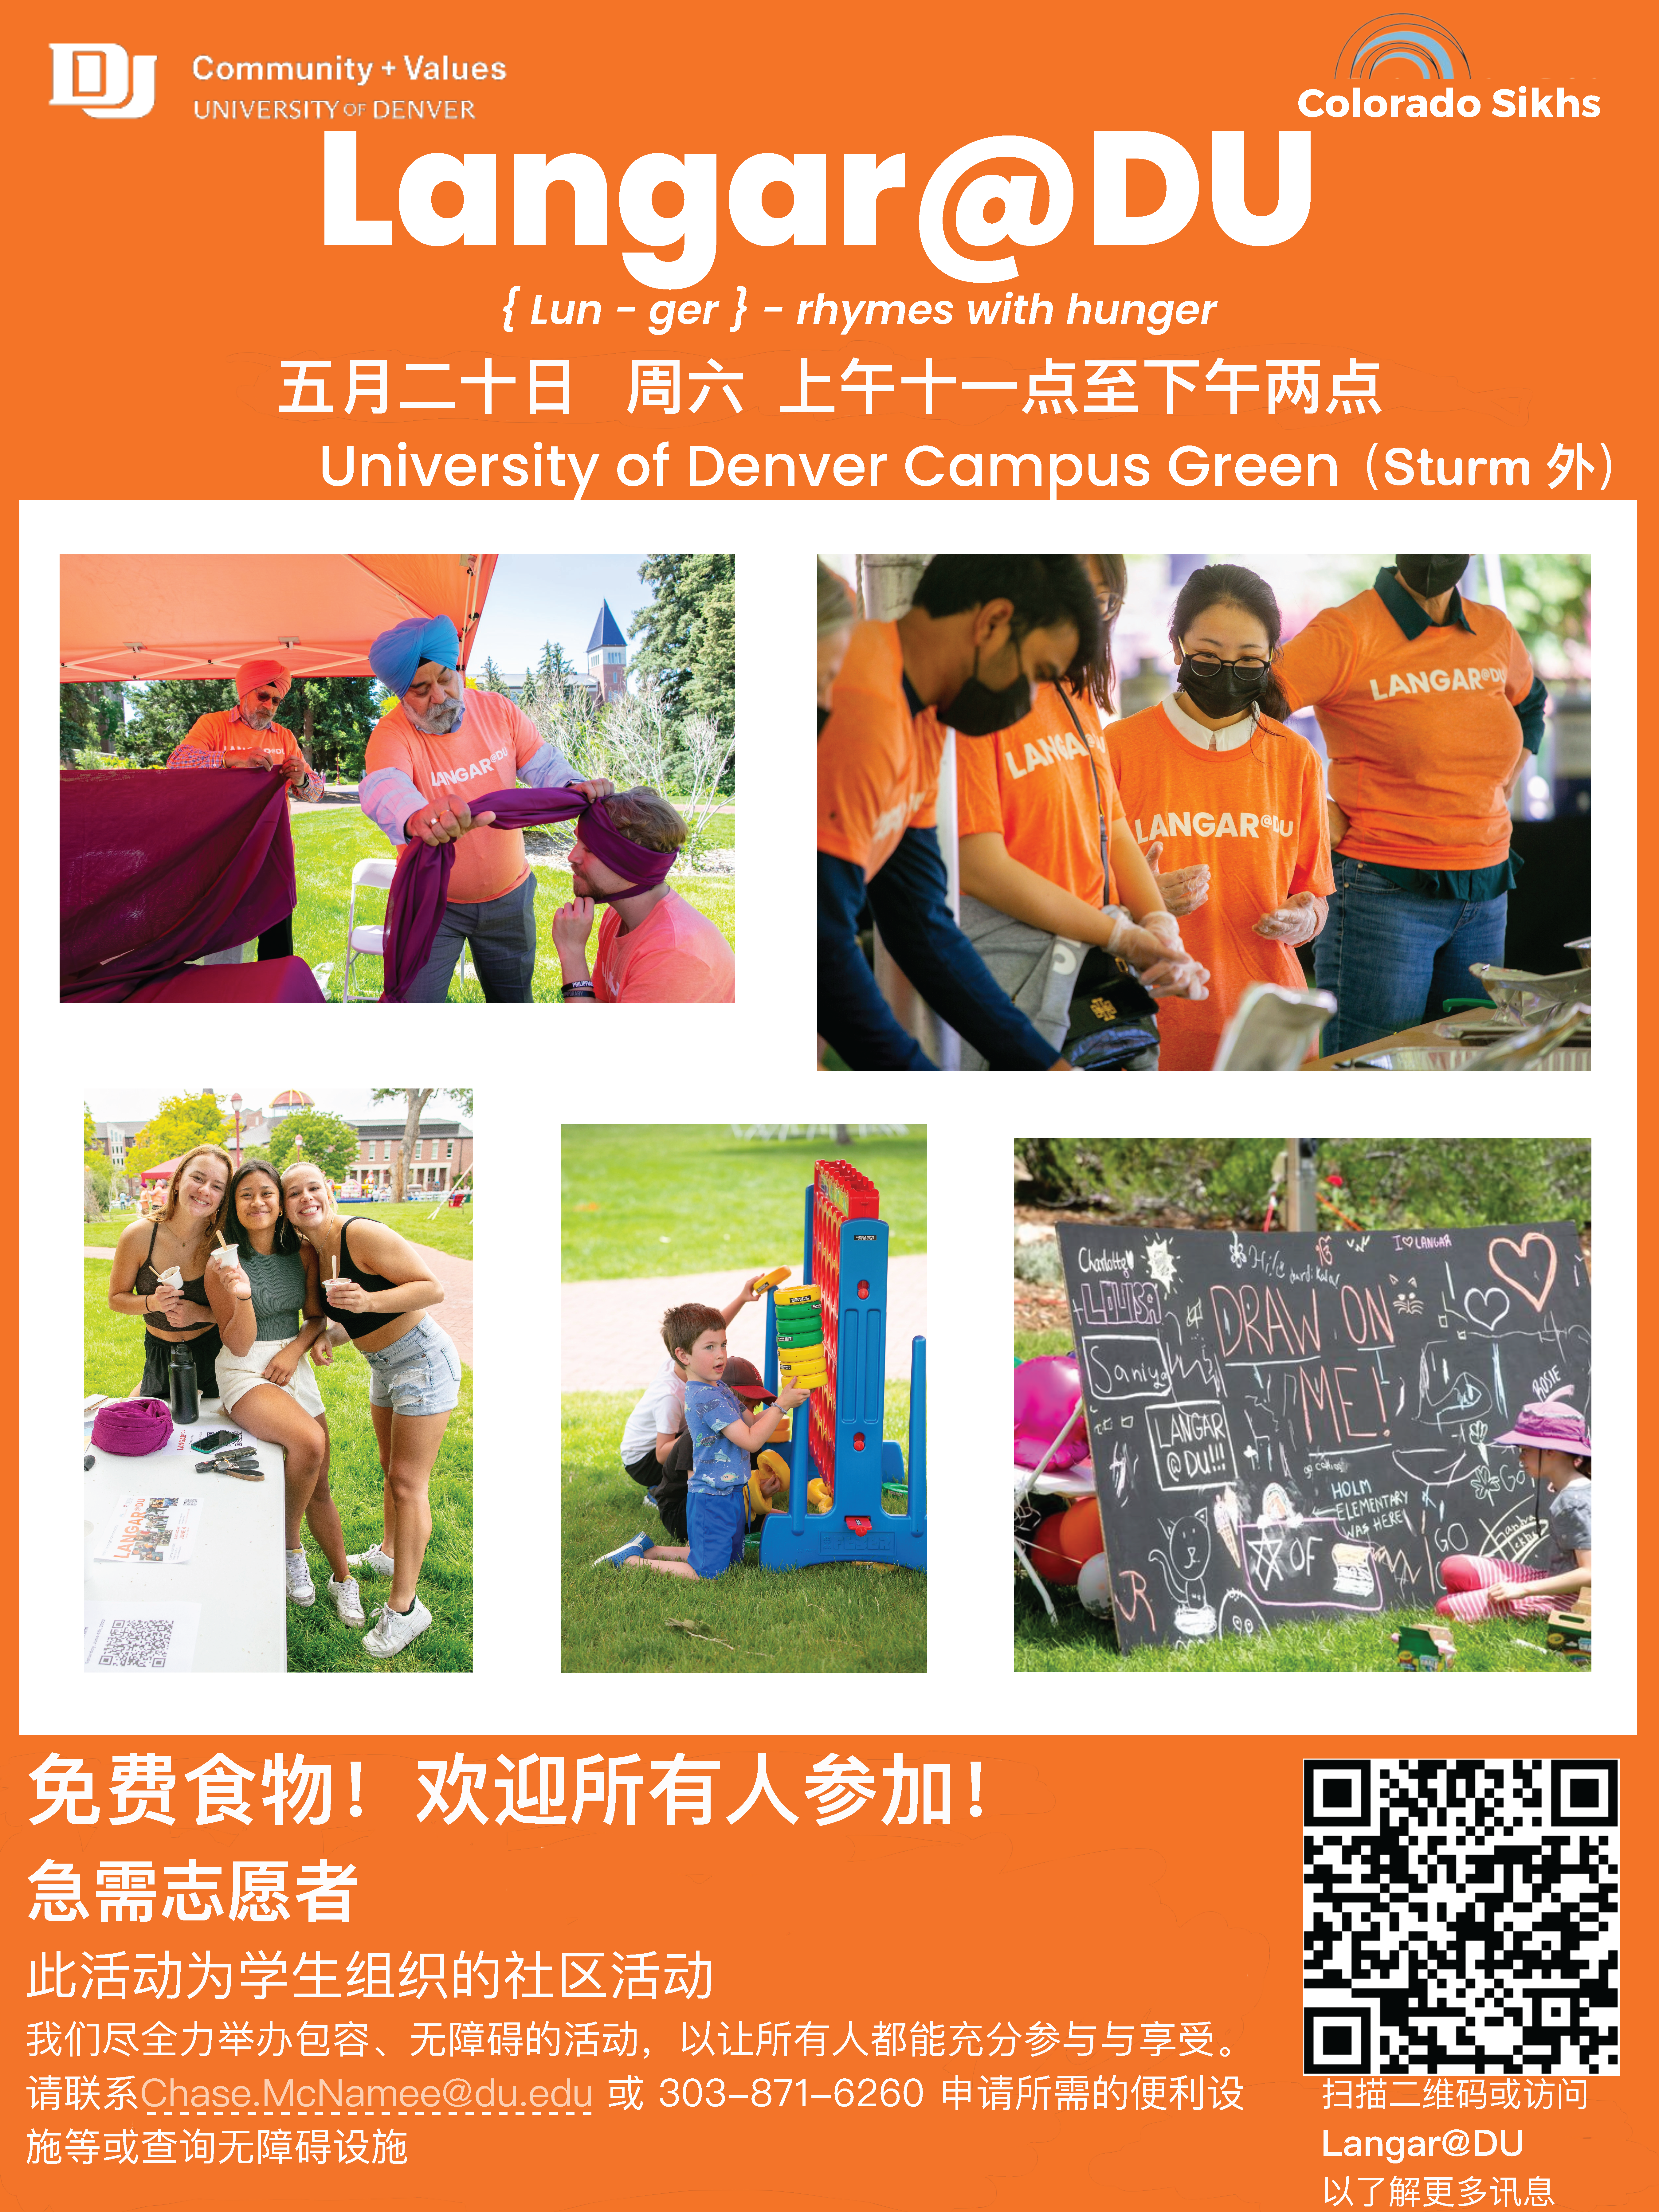 Langar@DU flyer in Chinese - orange background with the text from the above paragraphs